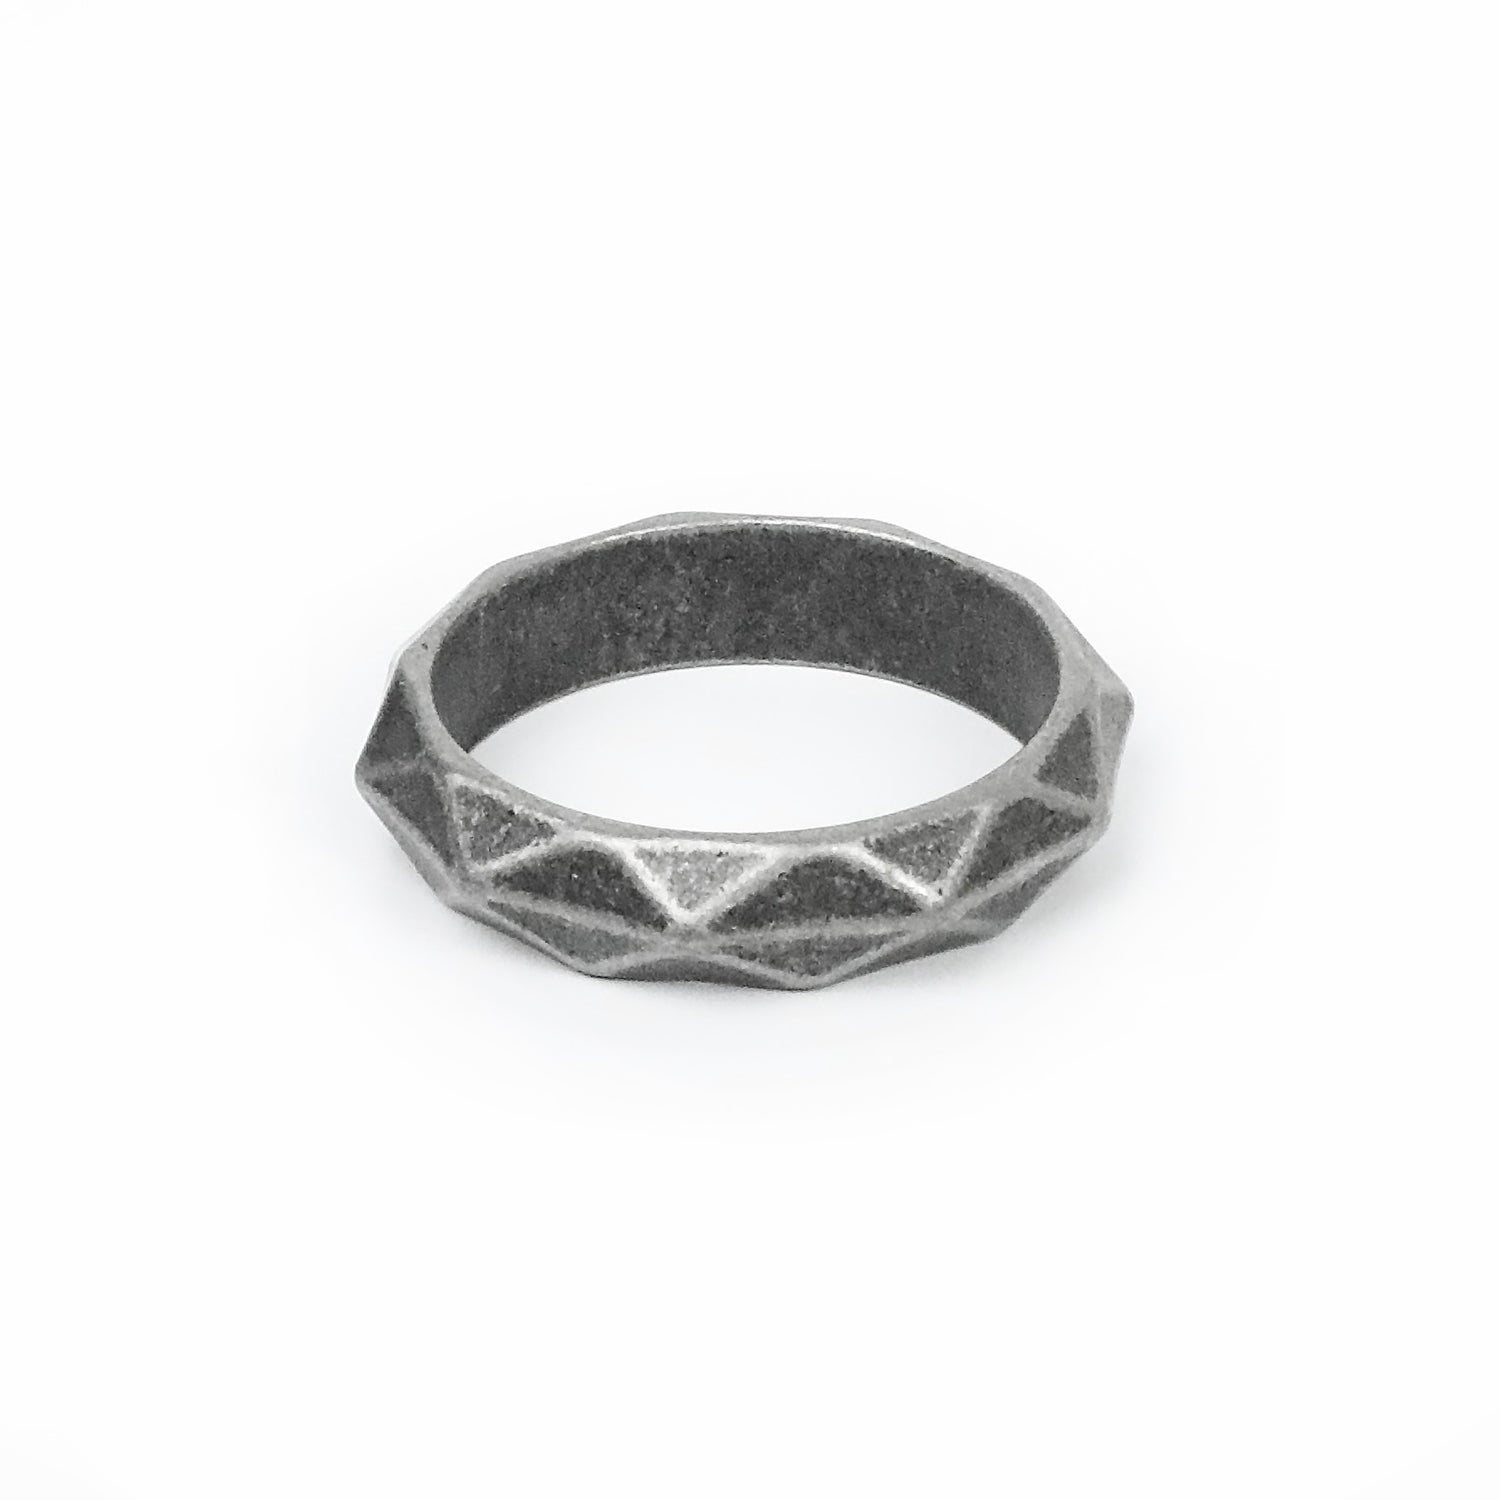 Facet Band - Aged Silver